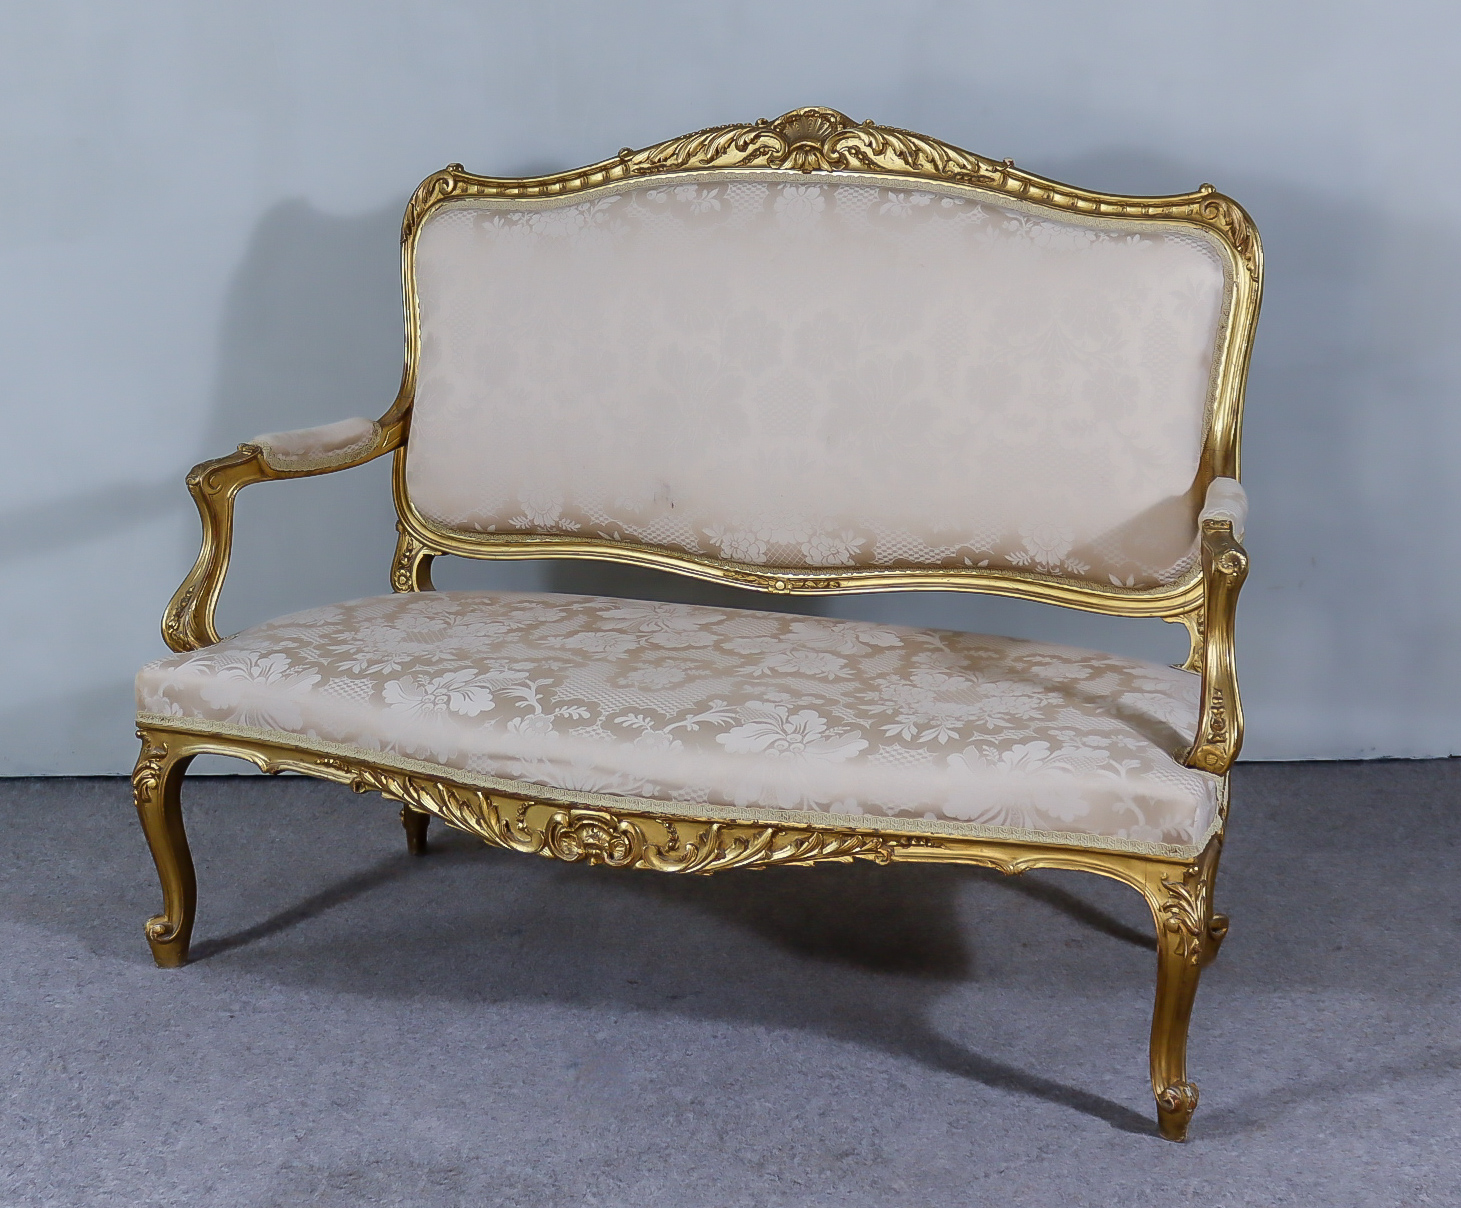 An Early 20th Century French Gilt Framed Two Seat Settee of "Louis XV" Design, with leaf carved - Image 2 of 6